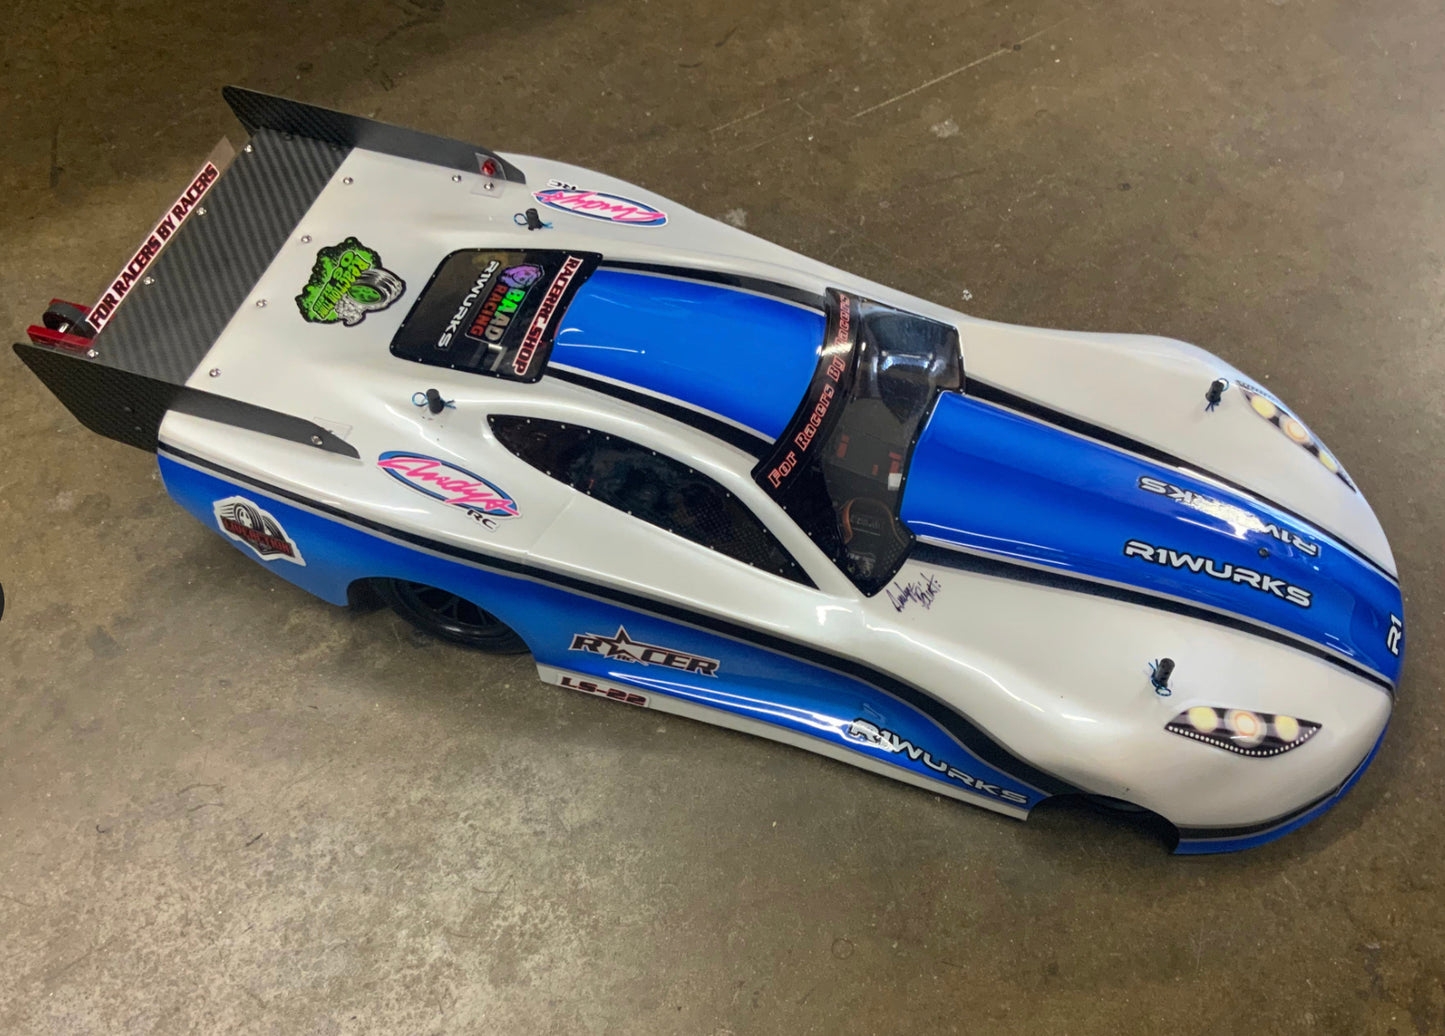 Racer RC by Andy’s RC LS-22 Drag Body with Polycarbonate .040 Wing